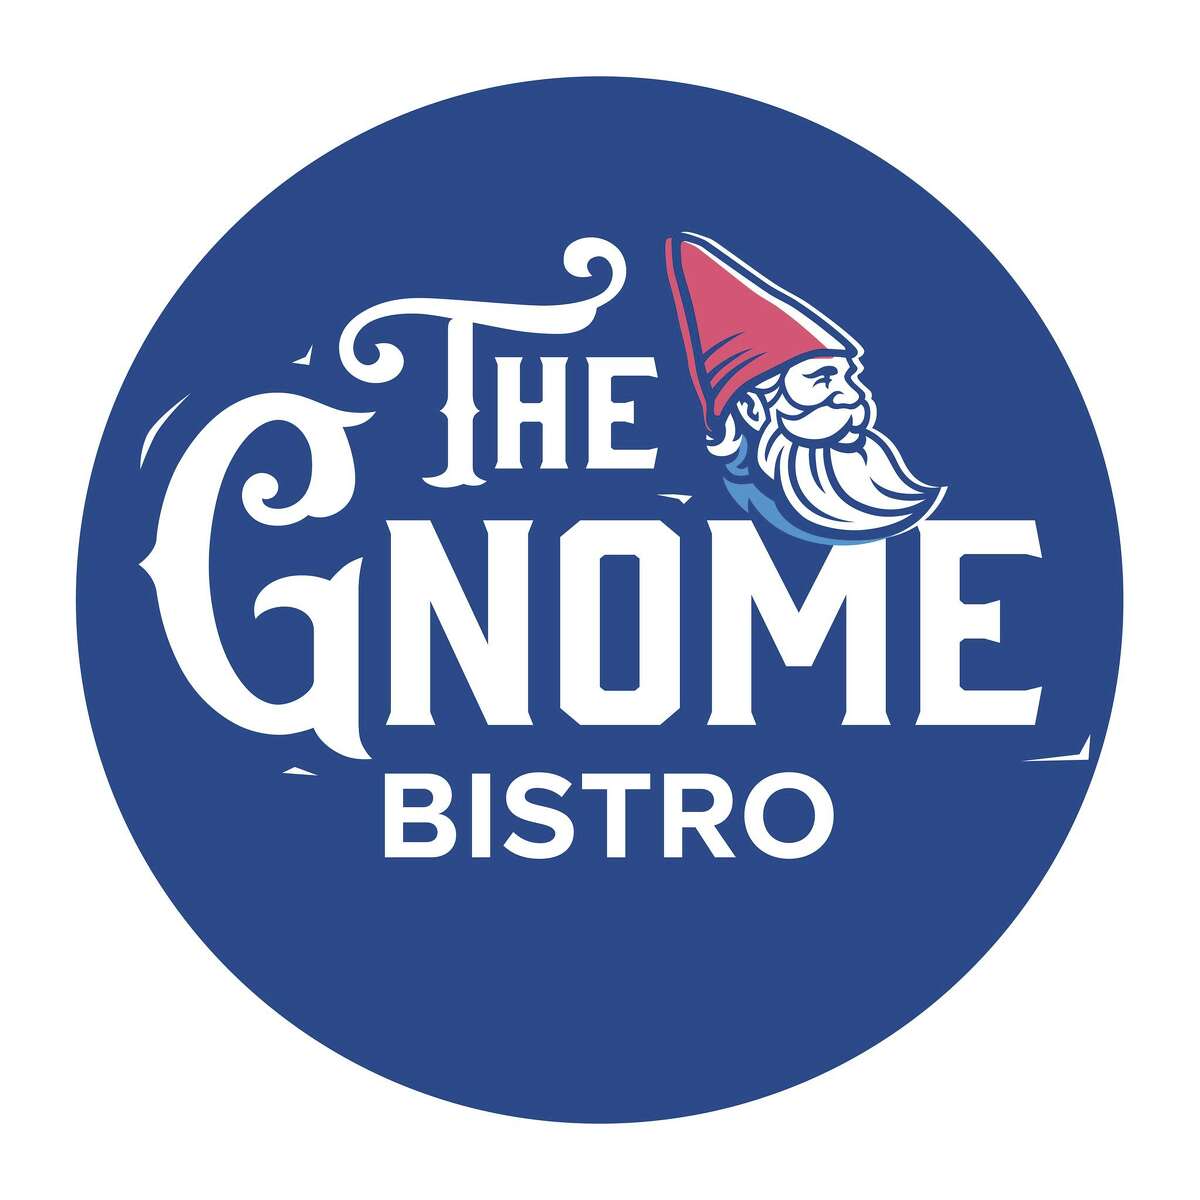 The logo for a new restaurant in East Chatham, due to open in the second week of October 2022.